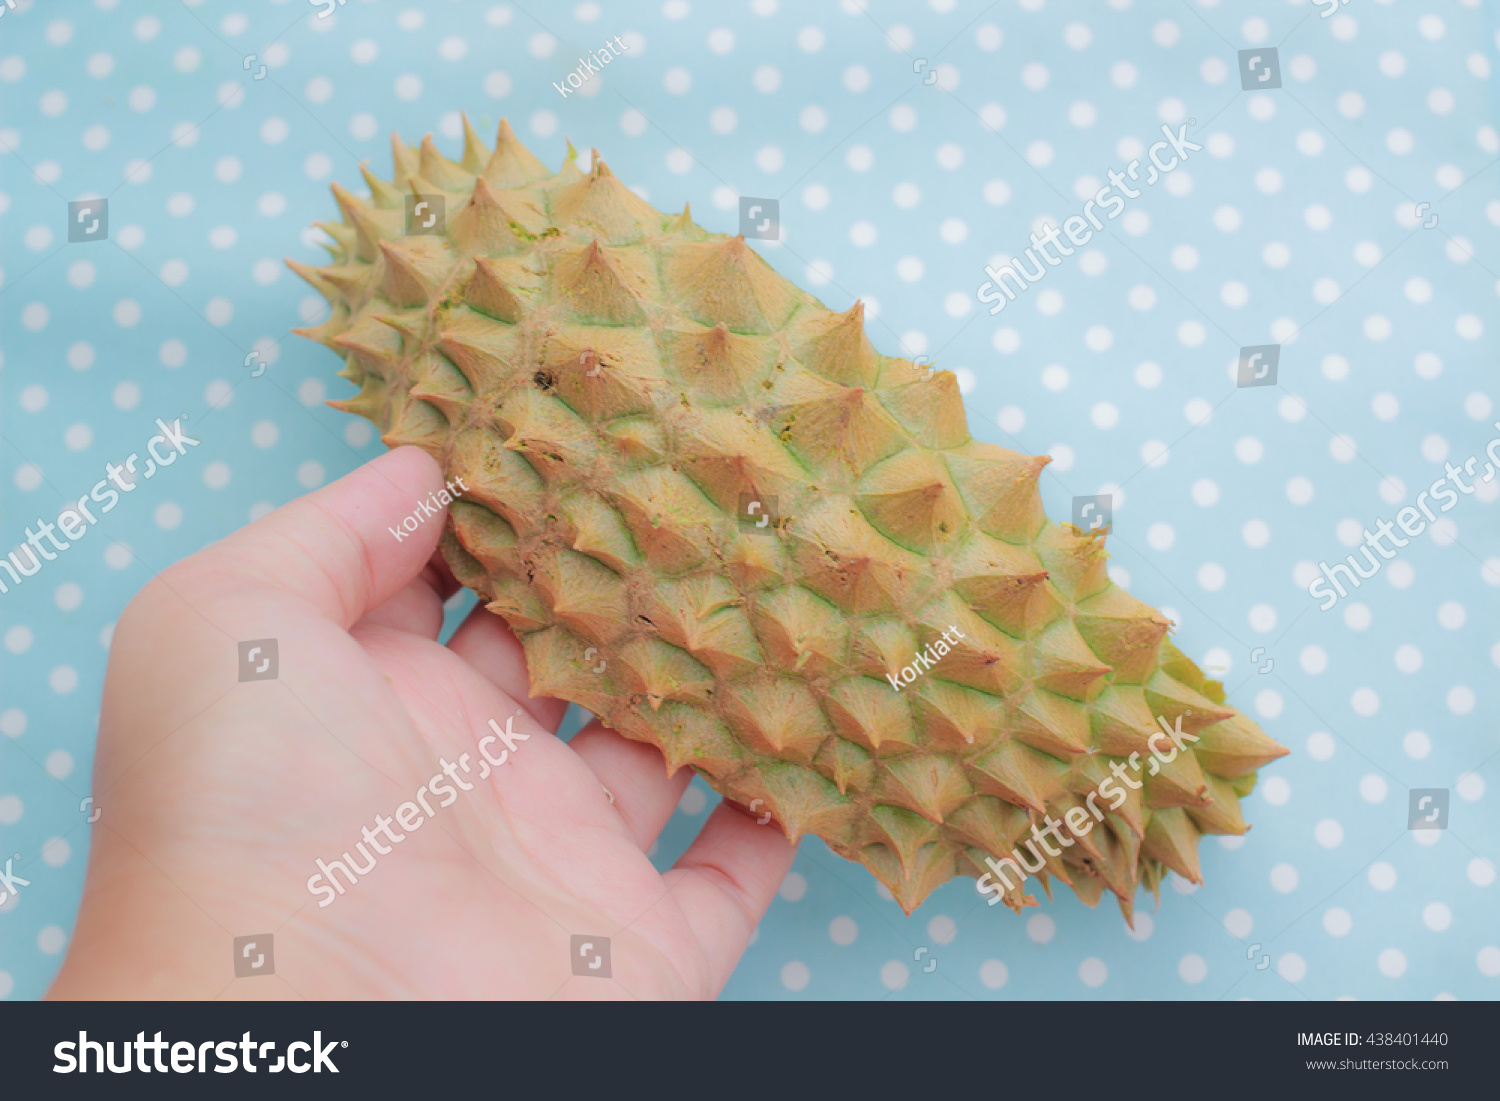 stock-photo-durian-shell-holding-by-hand-on-blue-polka-dots-background-with-vintage-tones-and-soft-focus-438401440.jpg